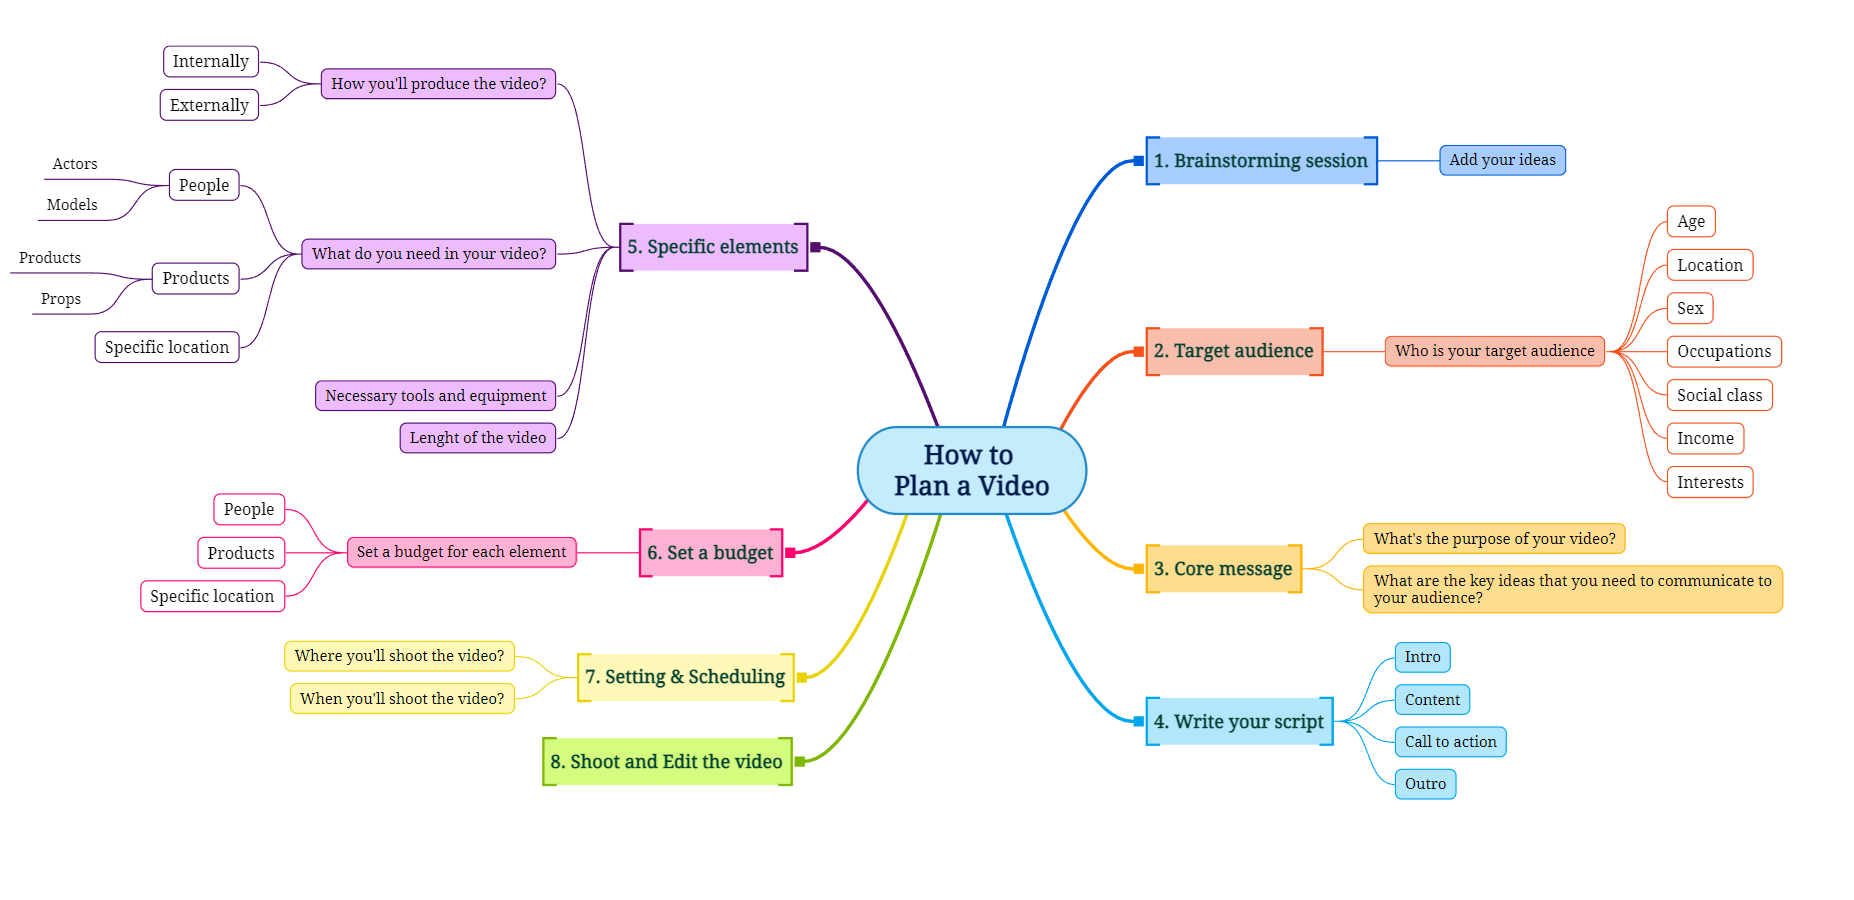 Mind map of how to plan a video